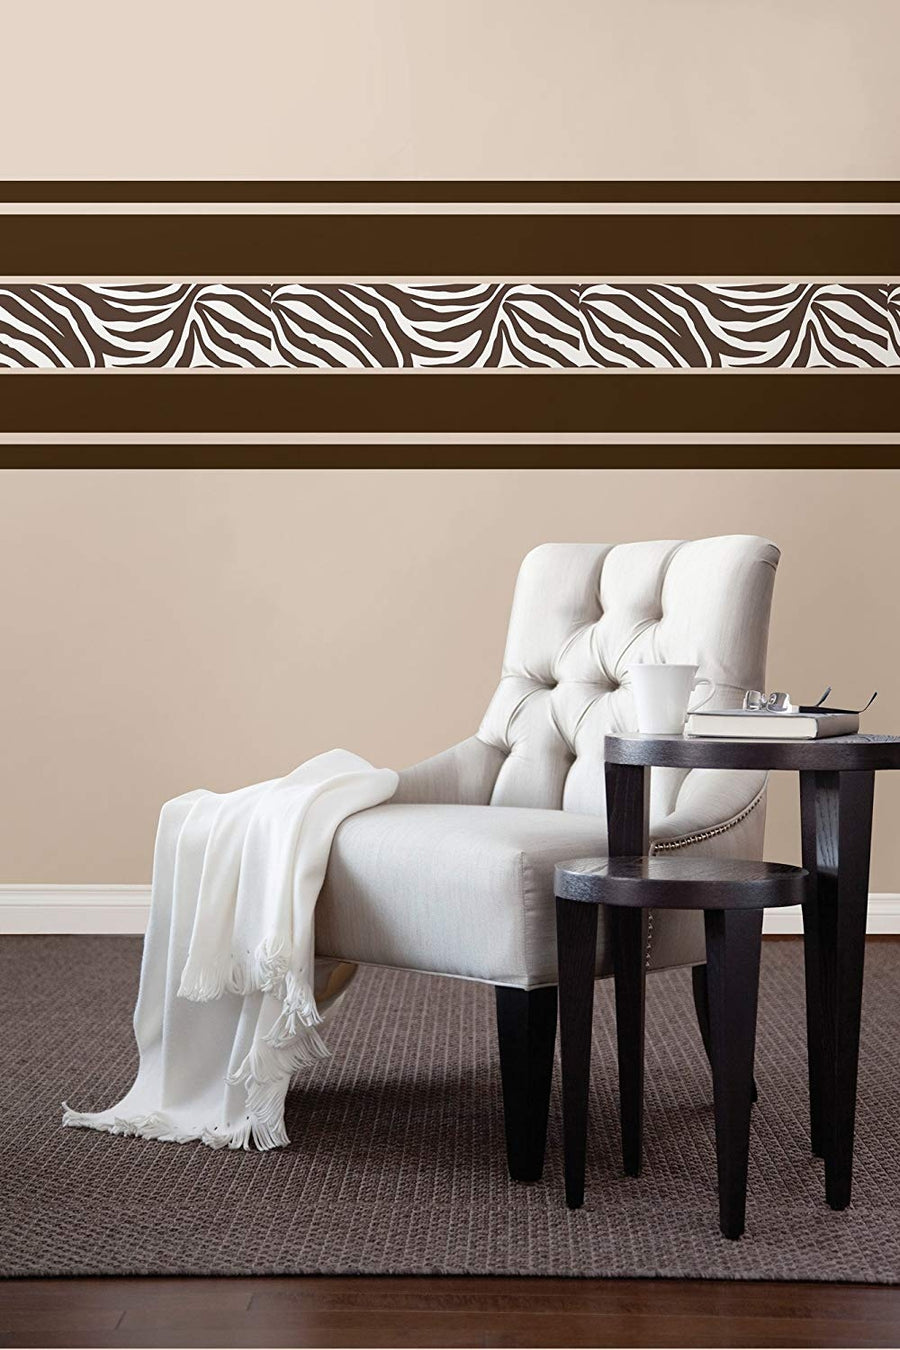 Brown and White Zebra Peel & Stick Wall Pops 16 FT Wallpaper Border - all4wallswall-paper